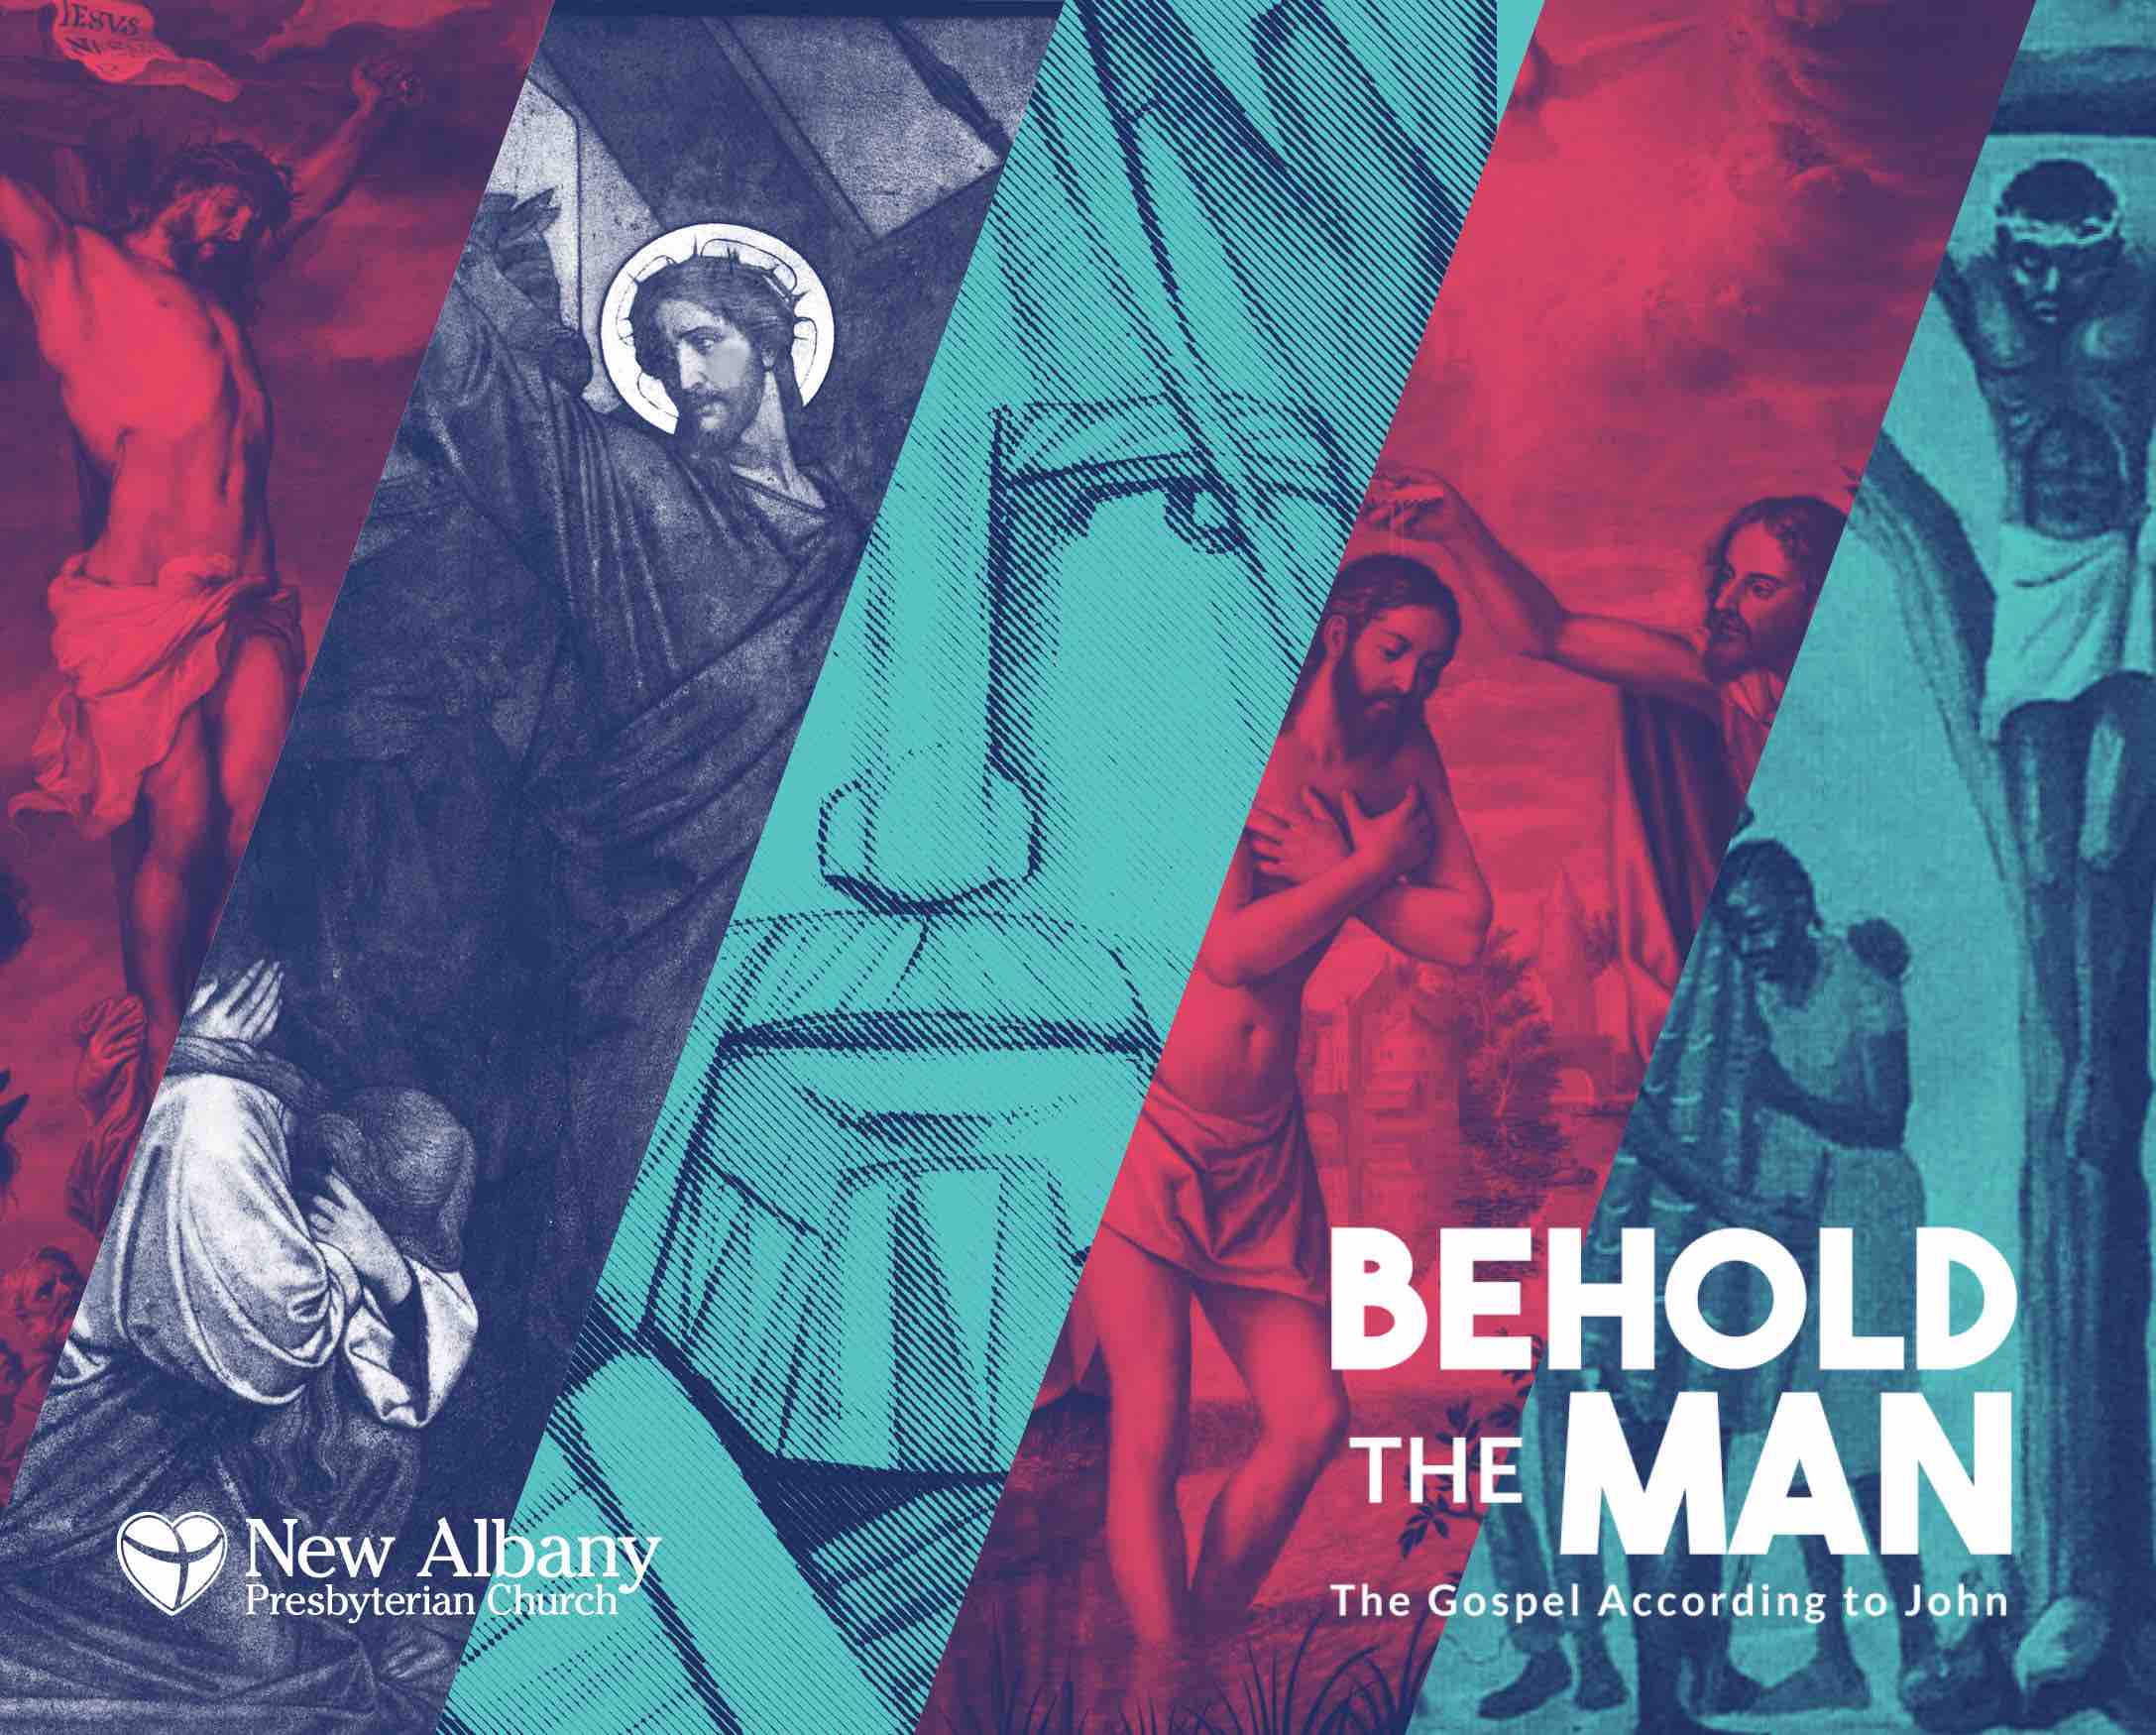 Behold The Man: The Glory of Jesus Shown Through Us